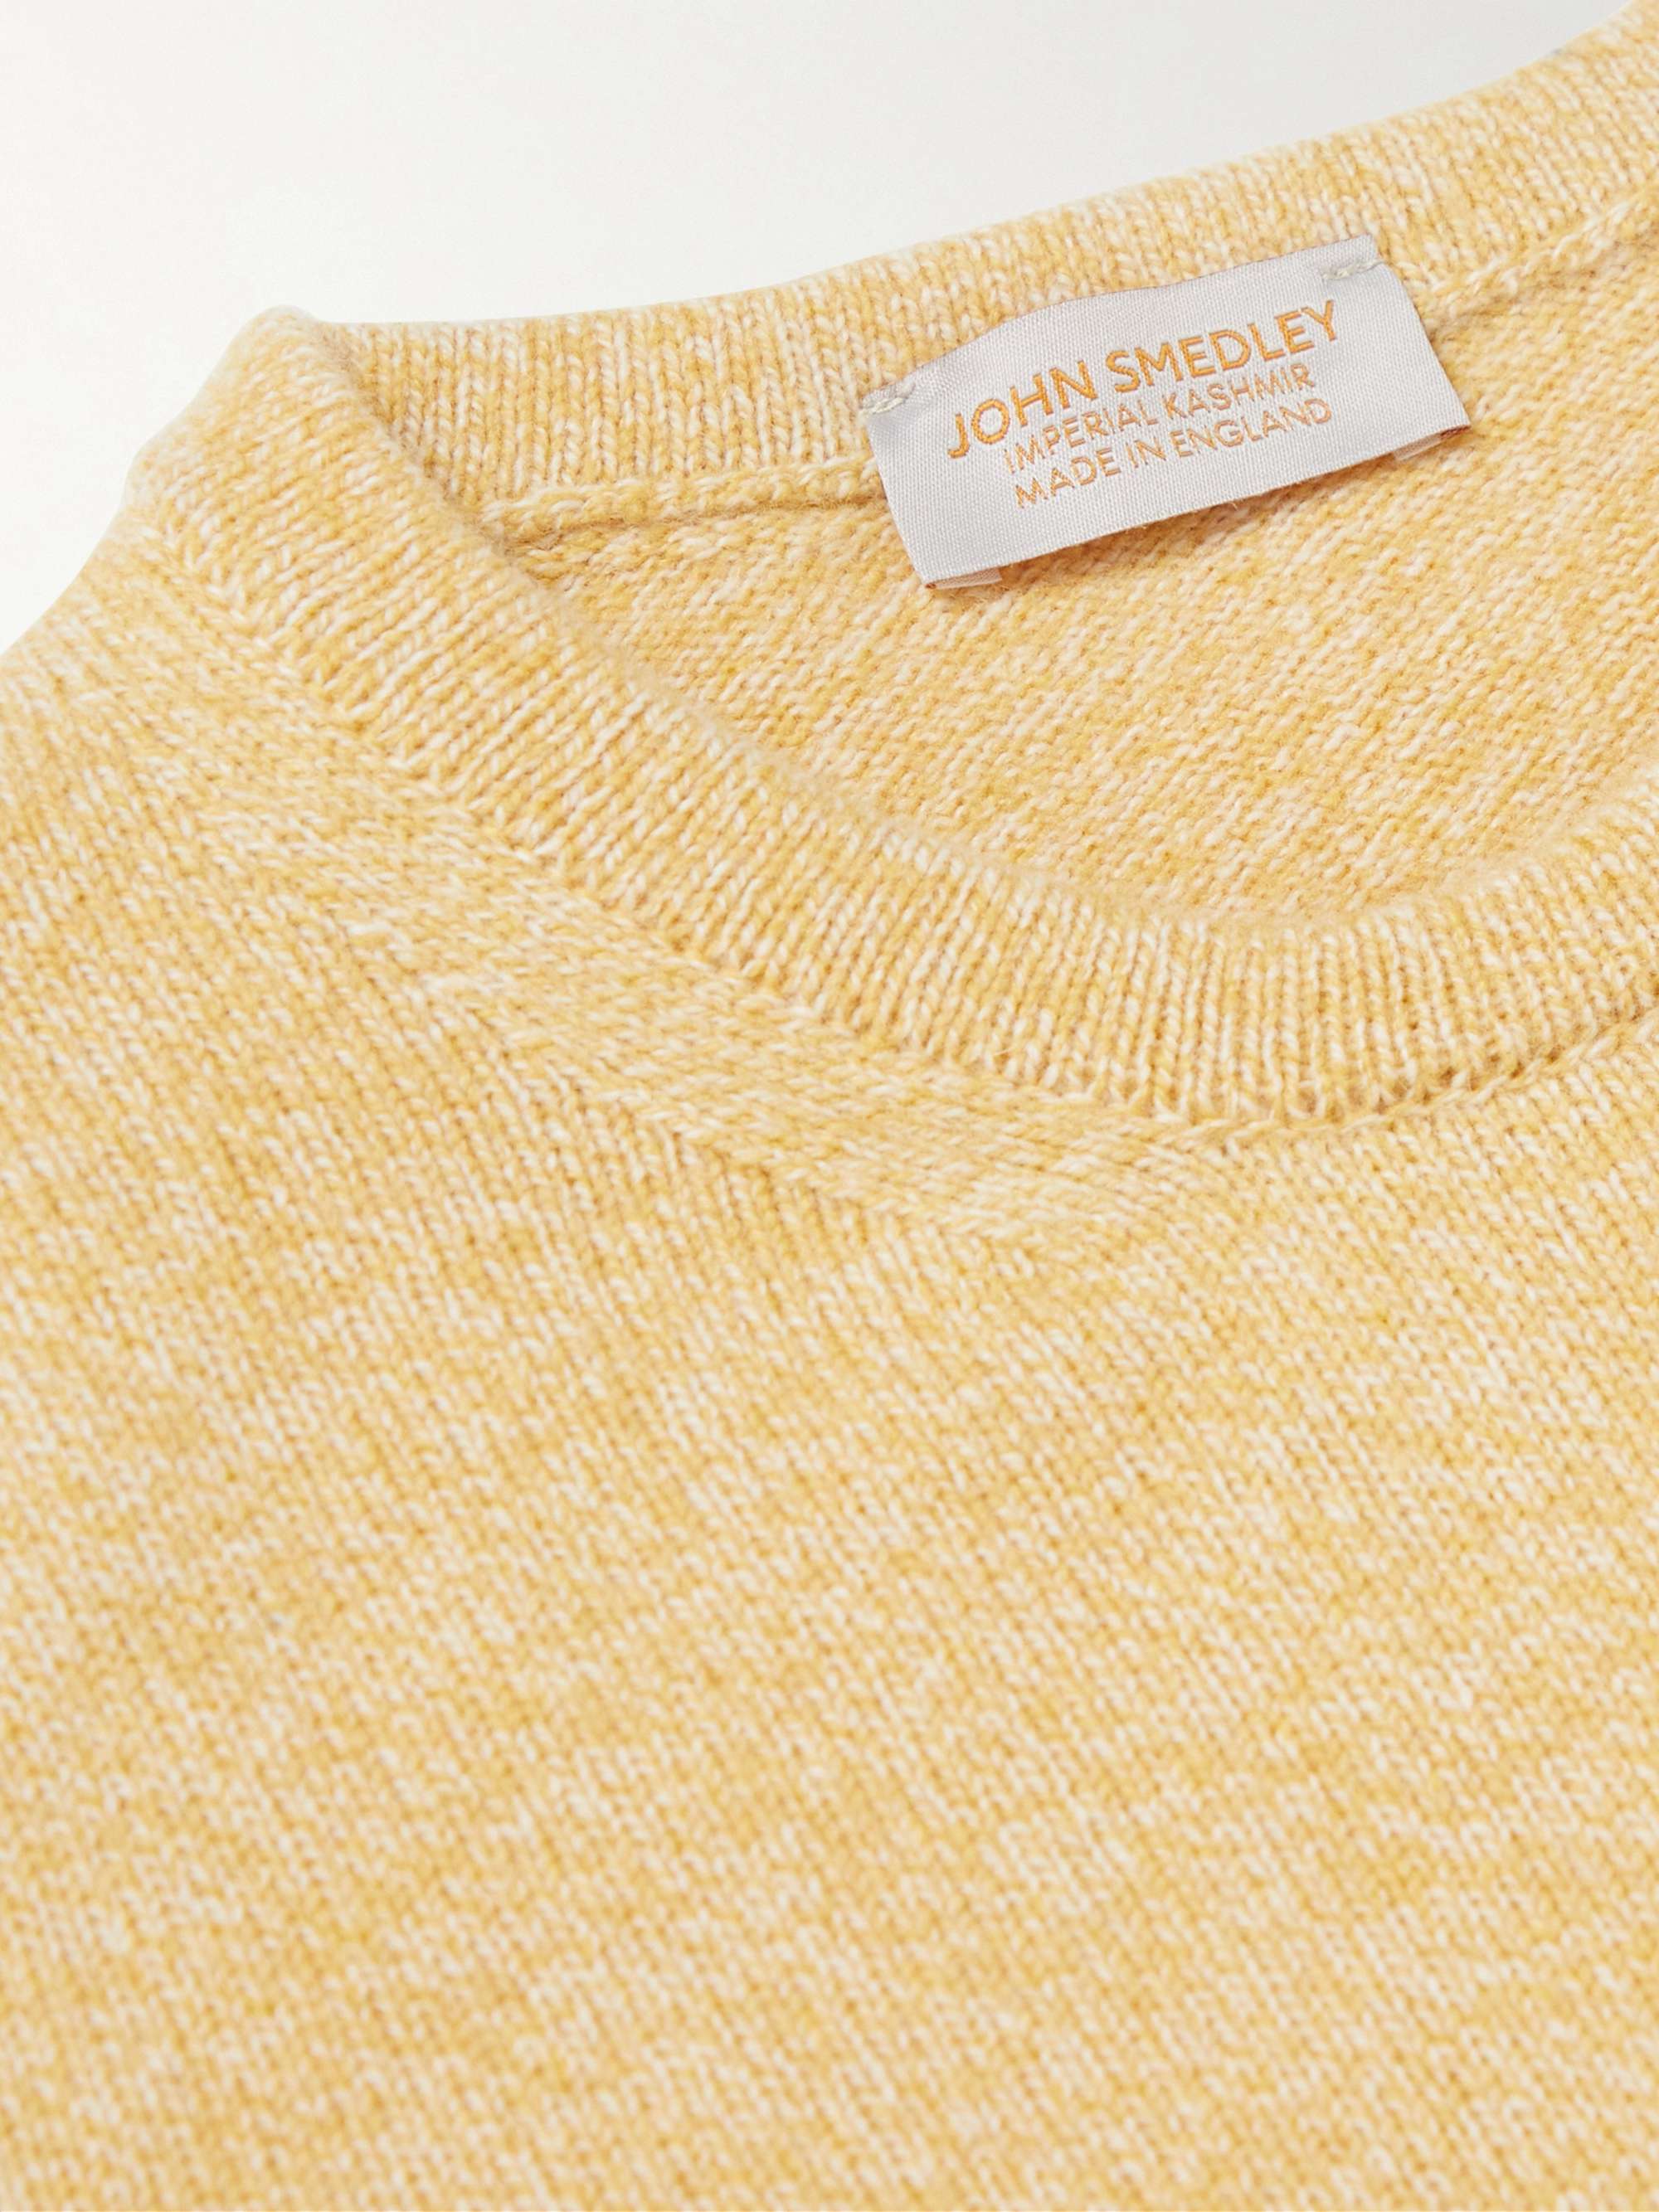 JOHN SMEDLEY Niko Recycled Cashmere and Merino Wool-Blend Sweater